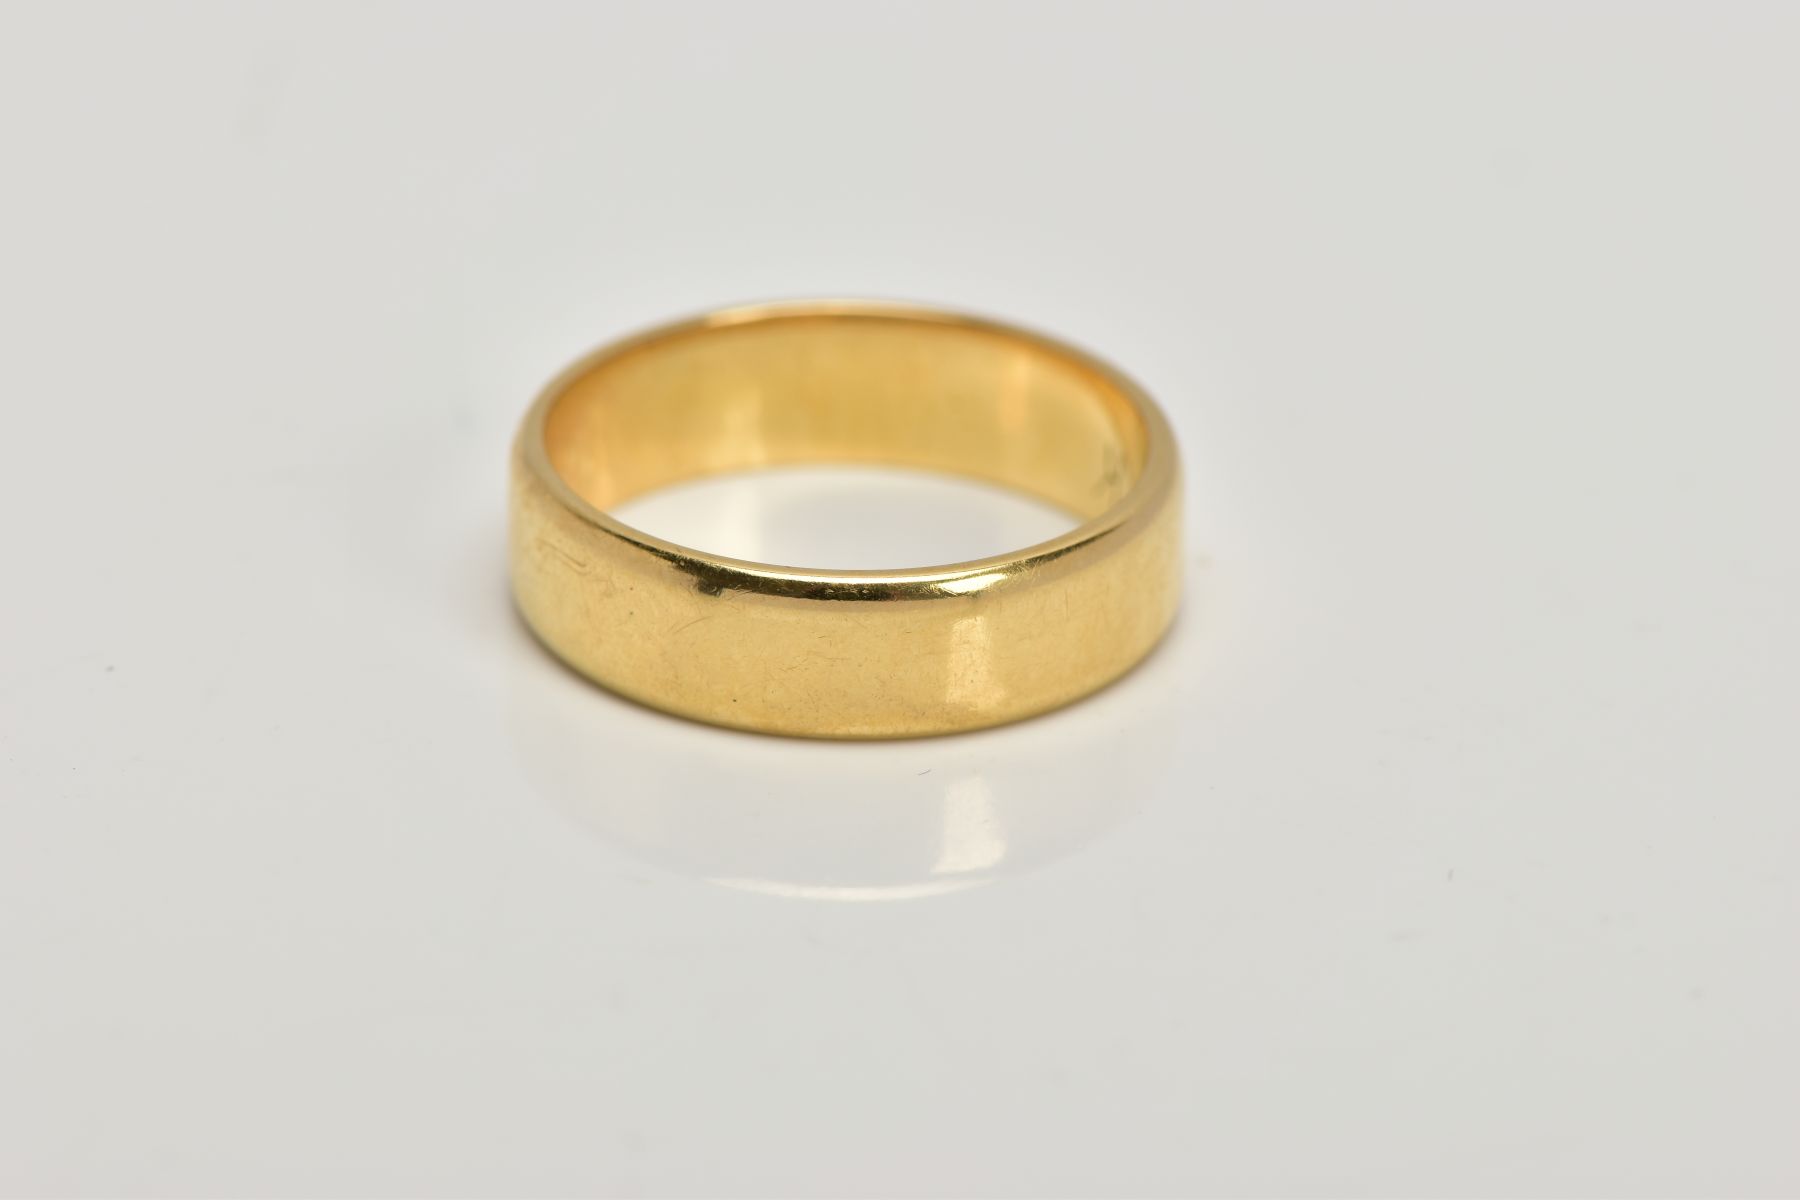 AN 18CT GOLD WIDE WEDDING BAND, plain polished design, approximate width 4.9mm, hallmarked 18ct gold - Image 2 of 2